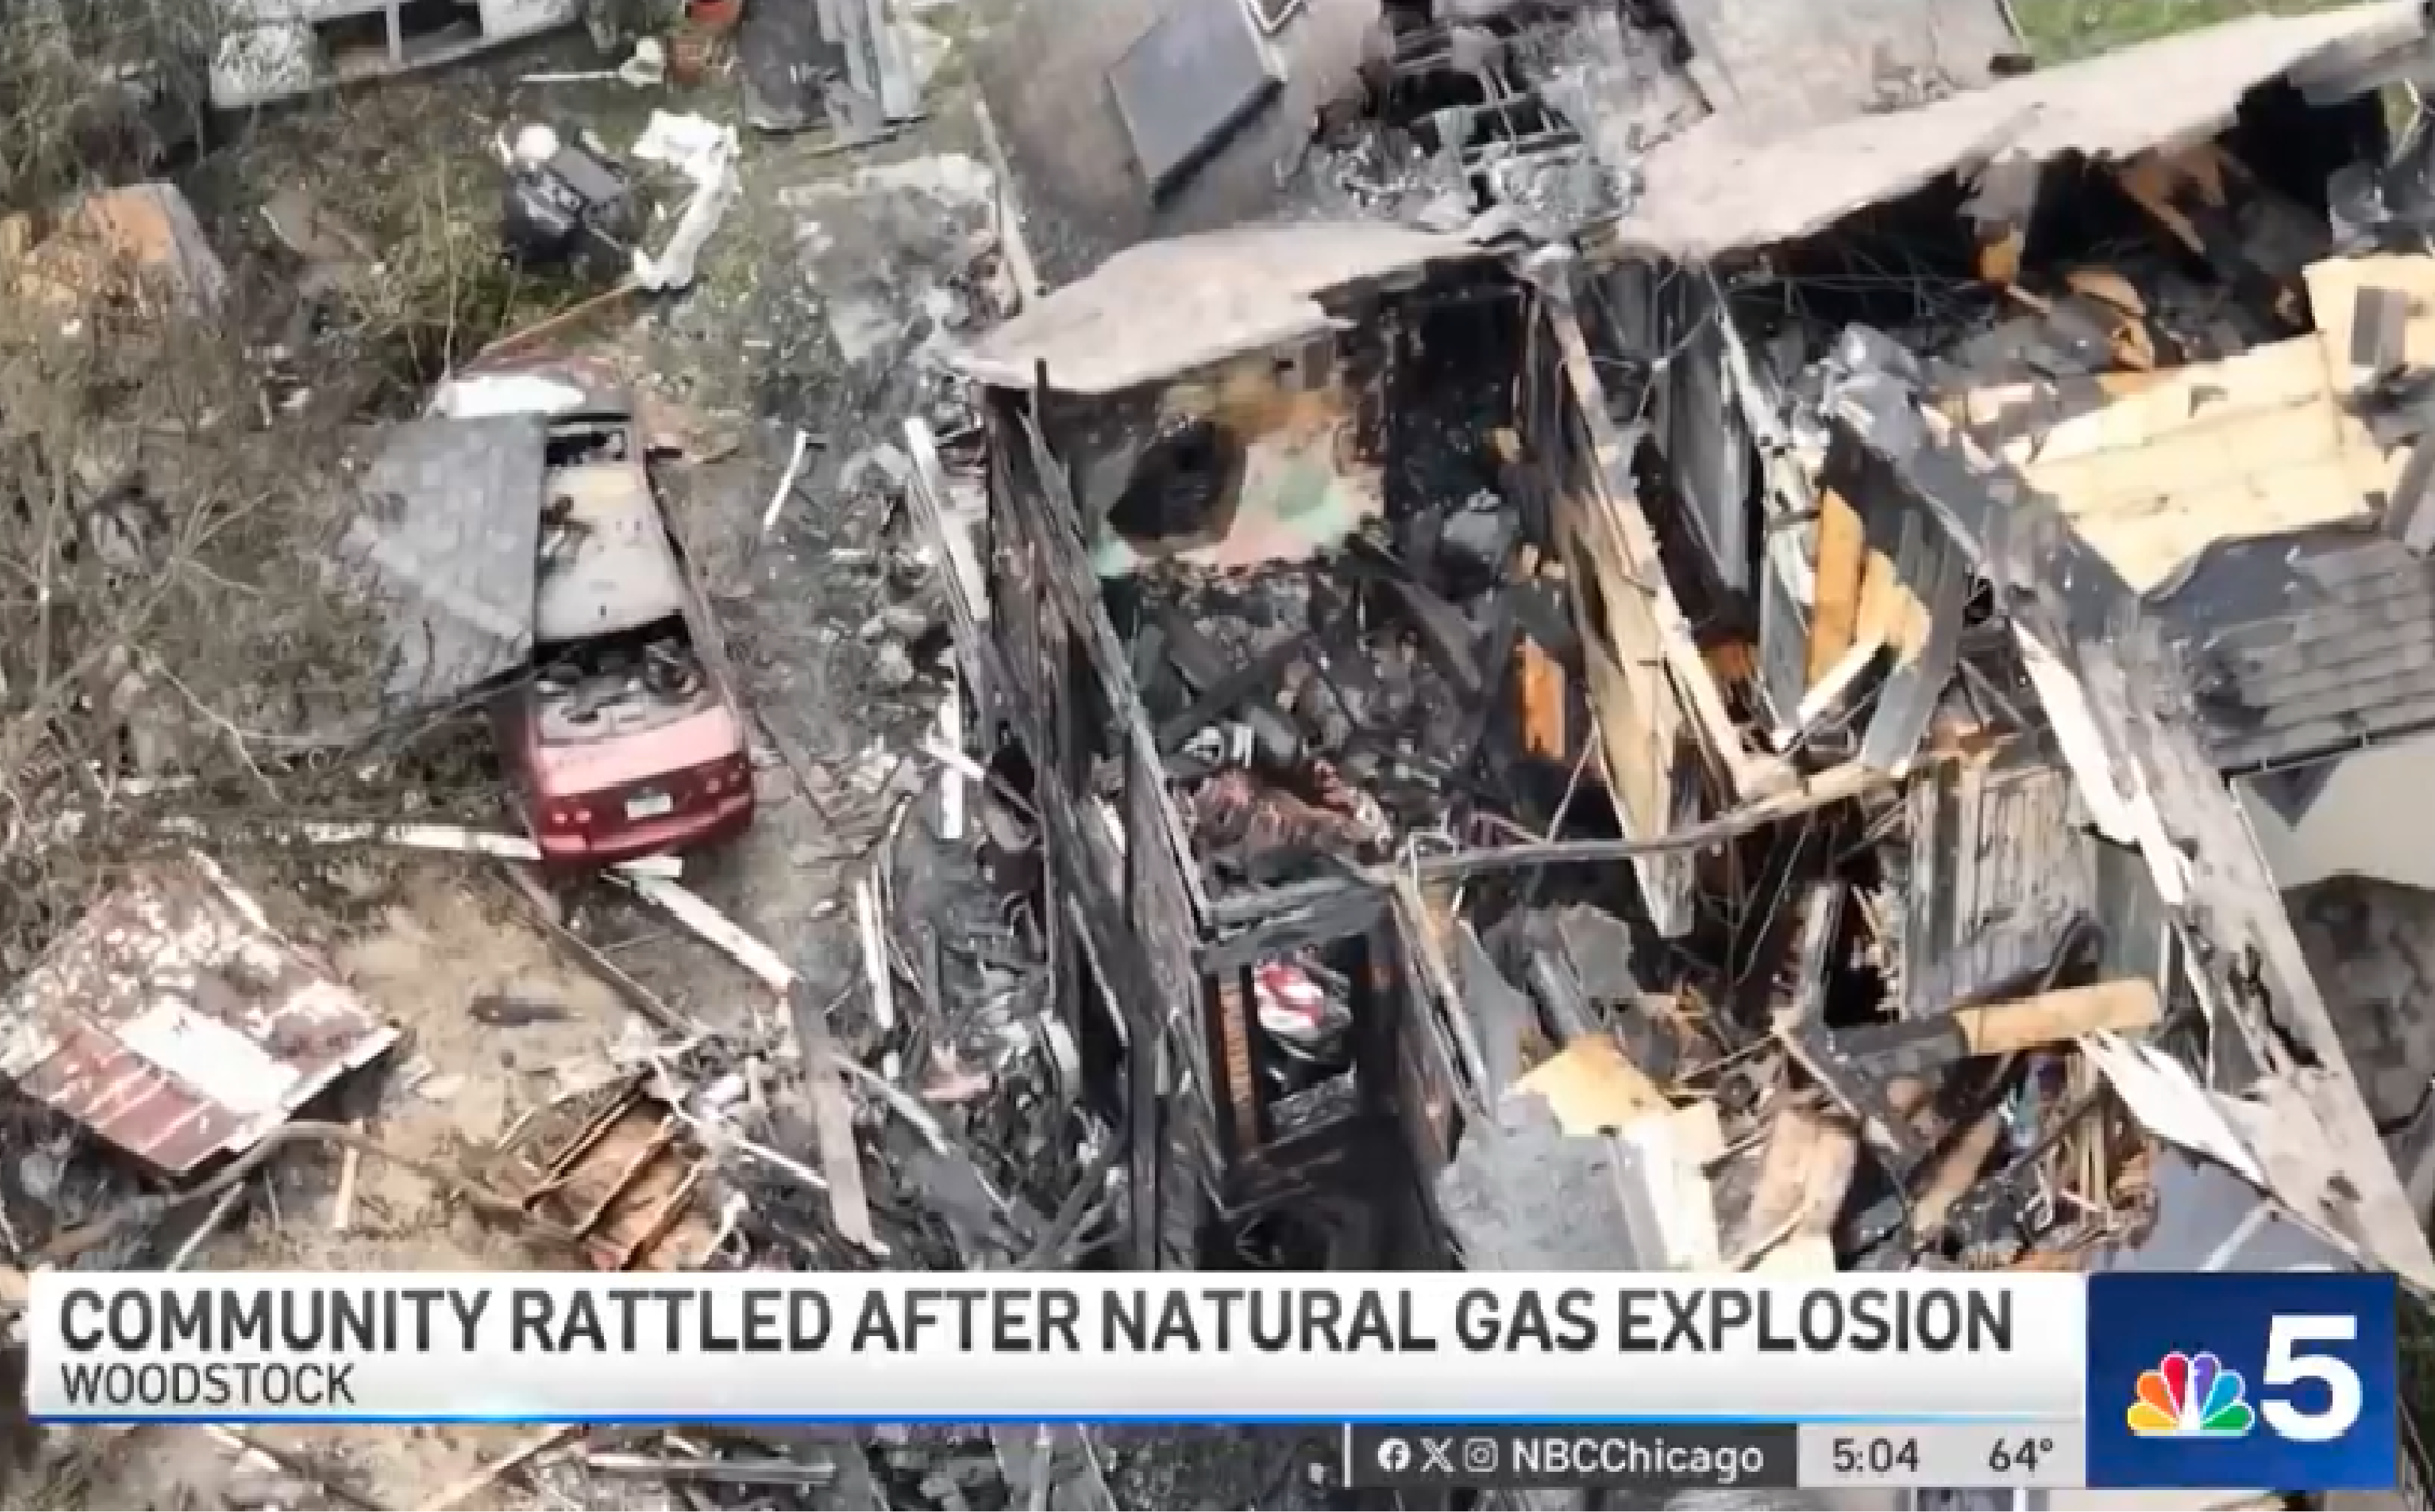 NBC 5 News Interviews Denova Detect After Natural Gas Explosion That Displaced Multiple Families and Damaged at Least 10 Buildings